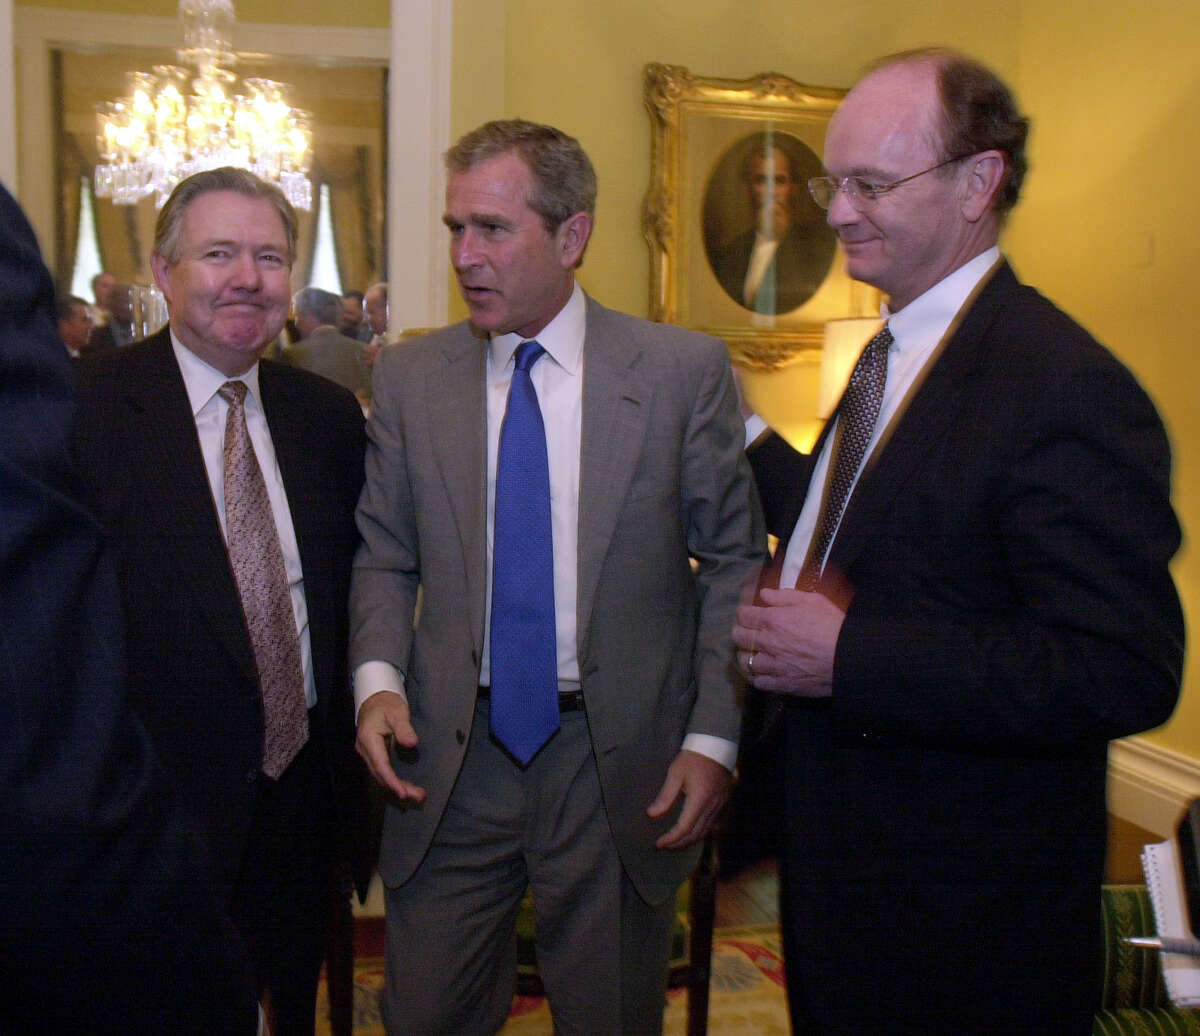 Texas Gov. George W. Bush, center, meets with Hearst Corporation executives Frank Bennack, left, and George Irish, during a meeting with the Hearst Newspapers editors at the Governor's Mansion in Austin, Texas on Wednesday, June 7, 2000.